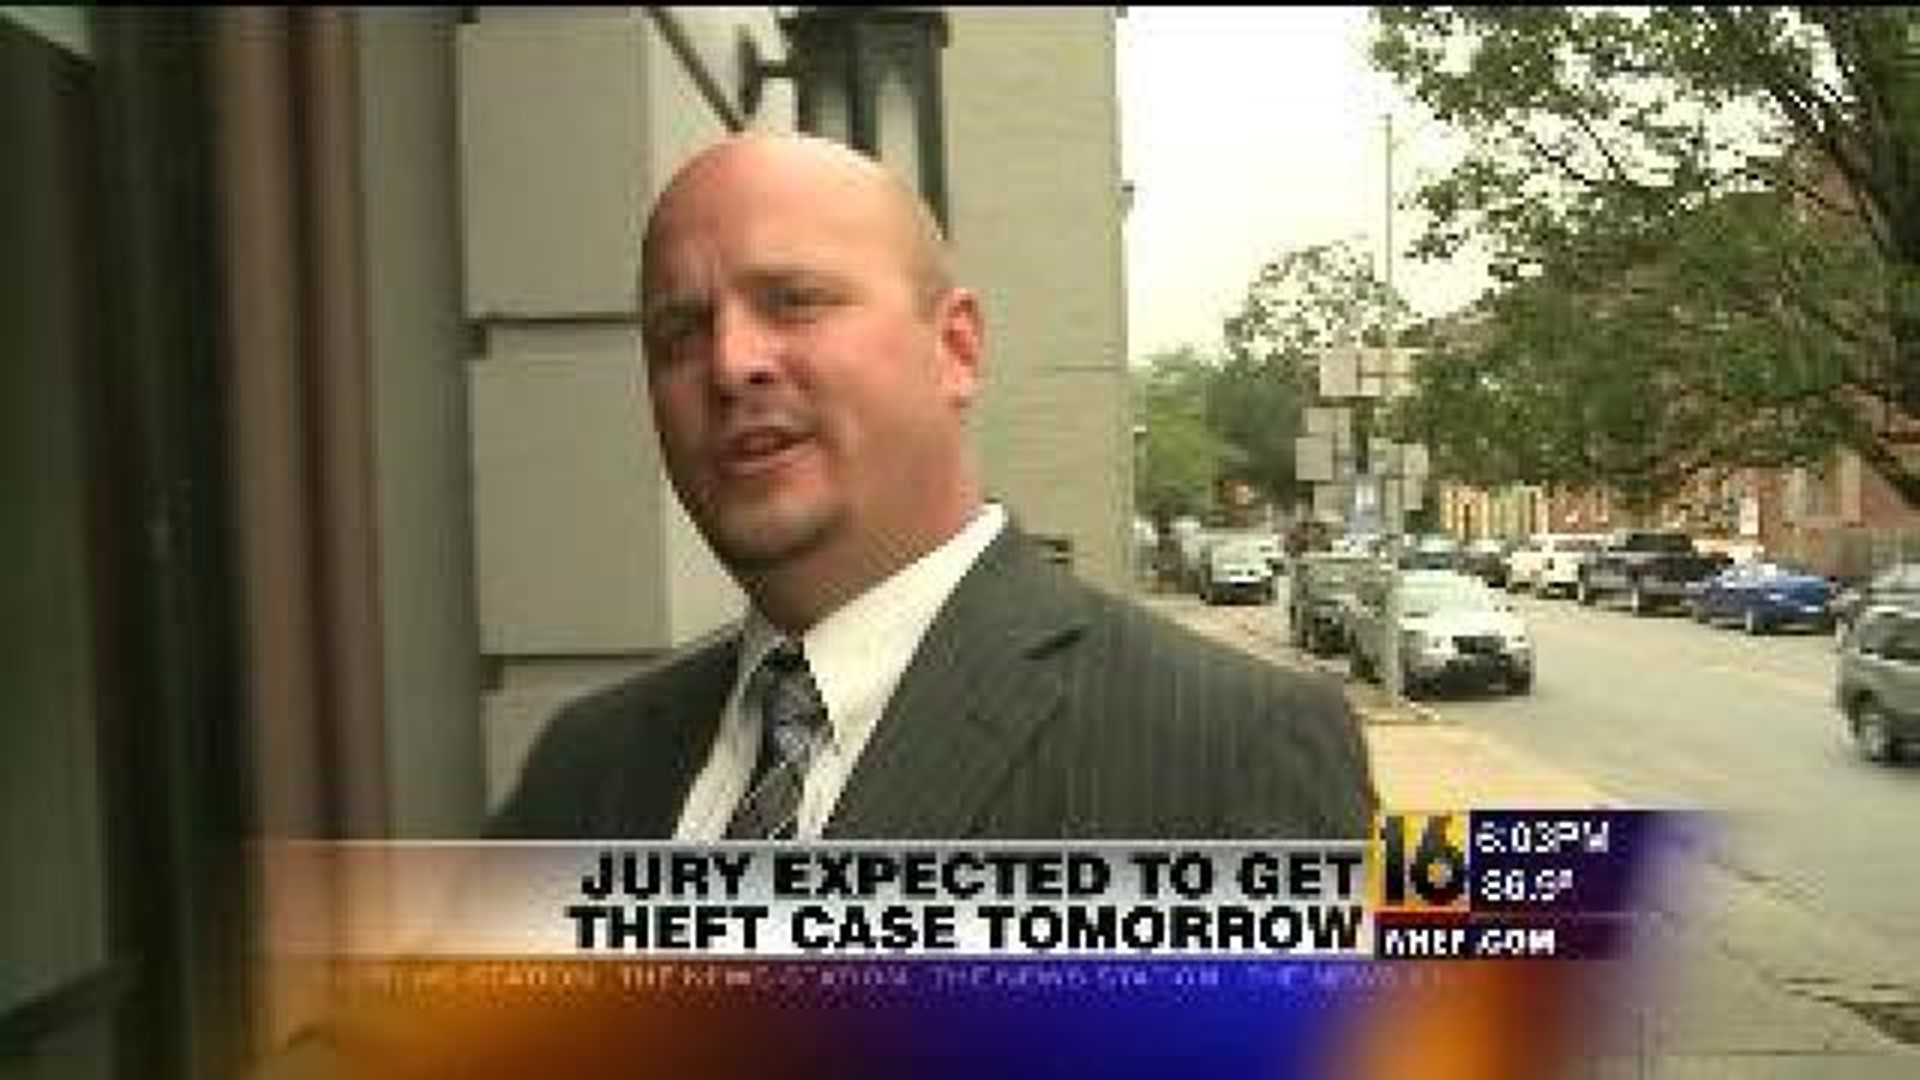 Former Commissioner on Trial for Theft